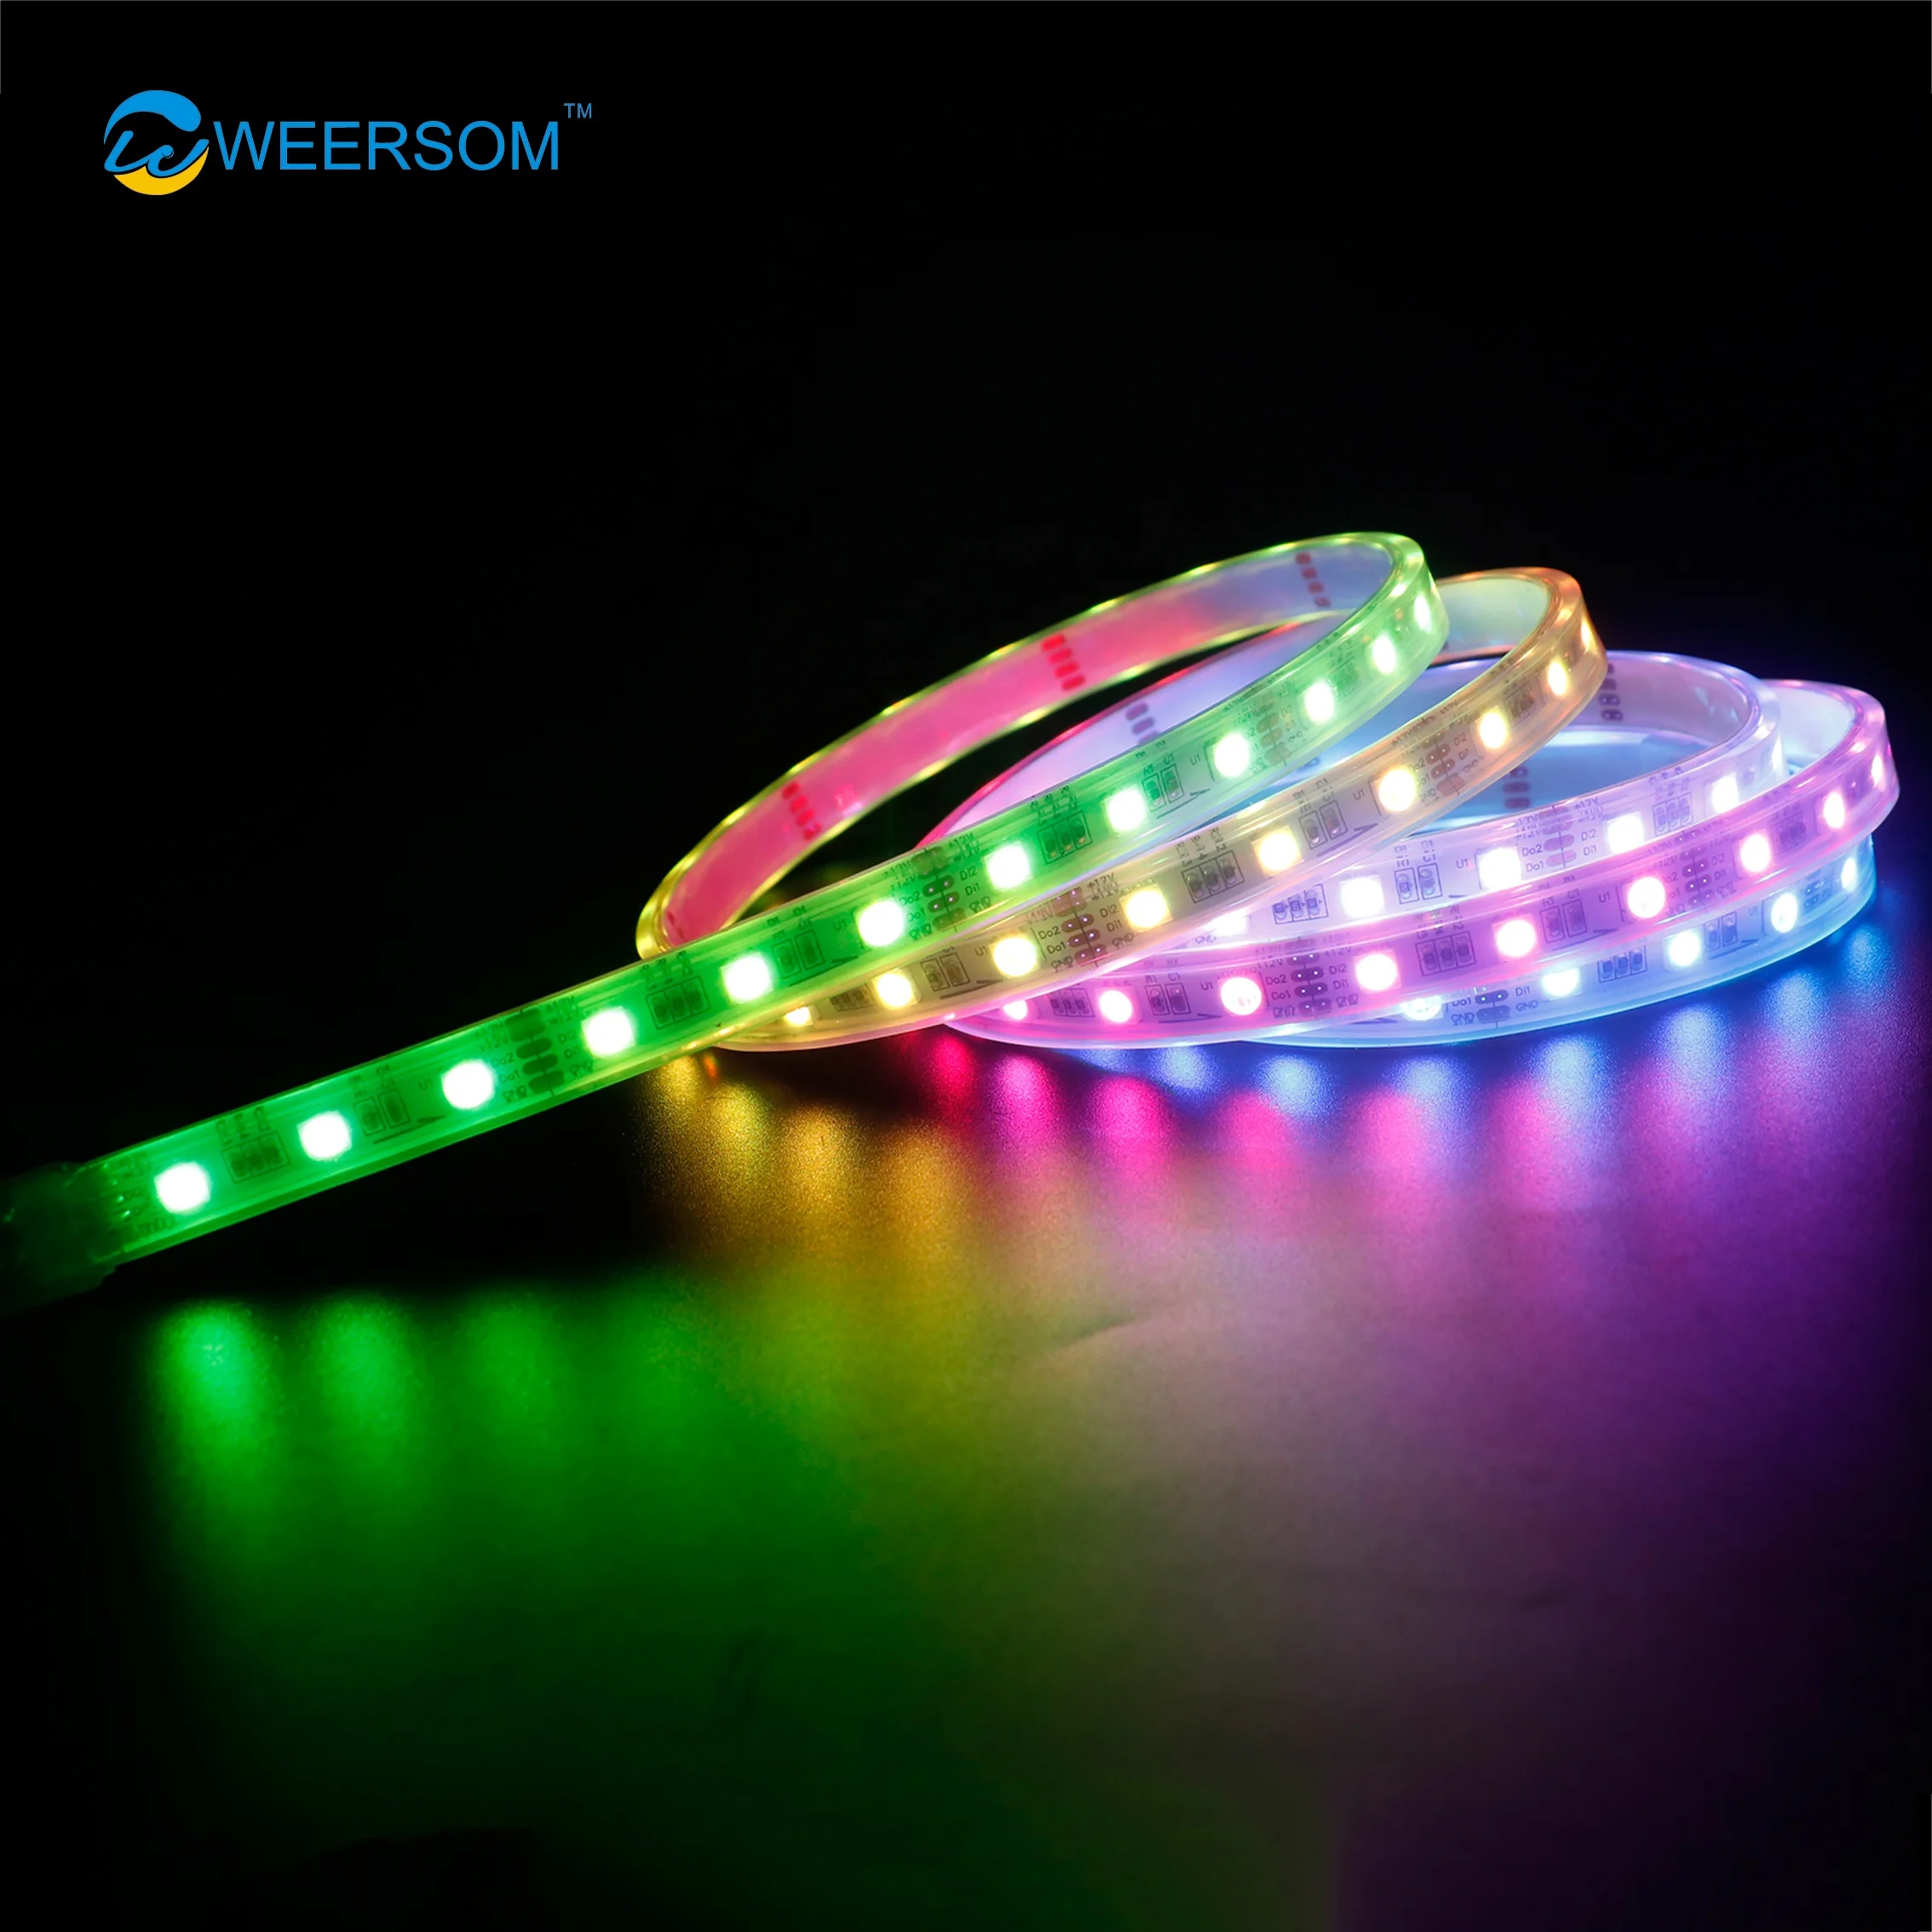 12v 24v flexible led strip lights P943 smd 5050 IP67 waterproof strip Use Underwater for Swimming Pool Fish Tank